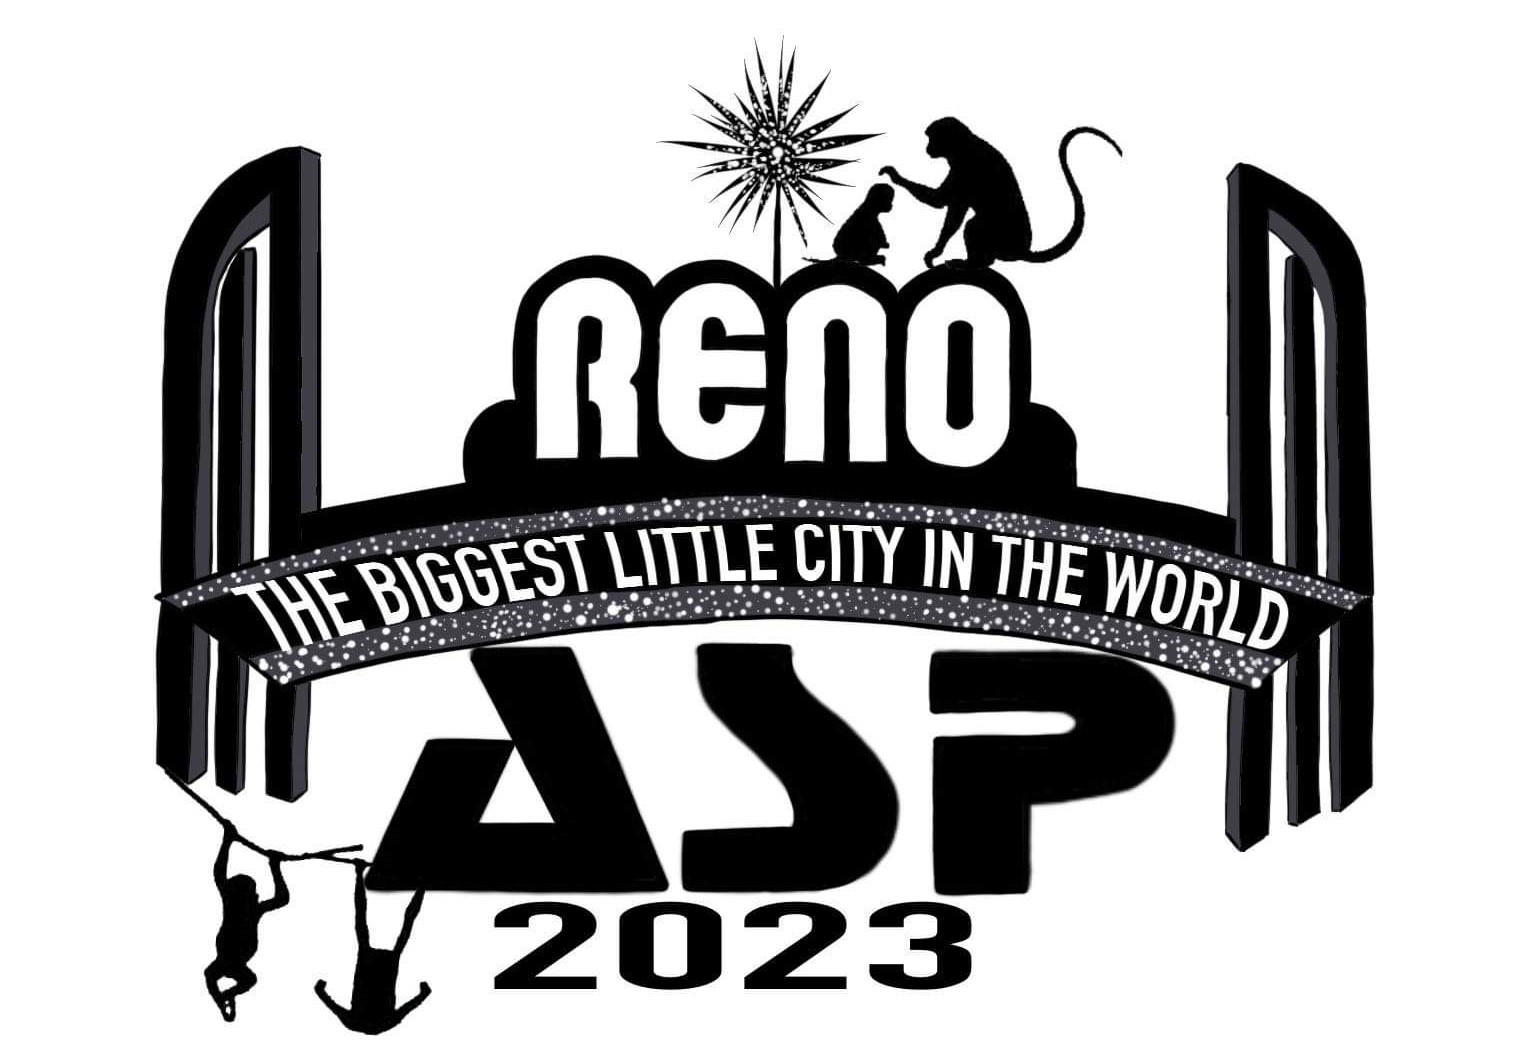 Black-and-white logo for ASP 2023 showing the archway in Reno with the words "The biggest little city in the world" with ASP 2023 underneath and various primates perched around the image.